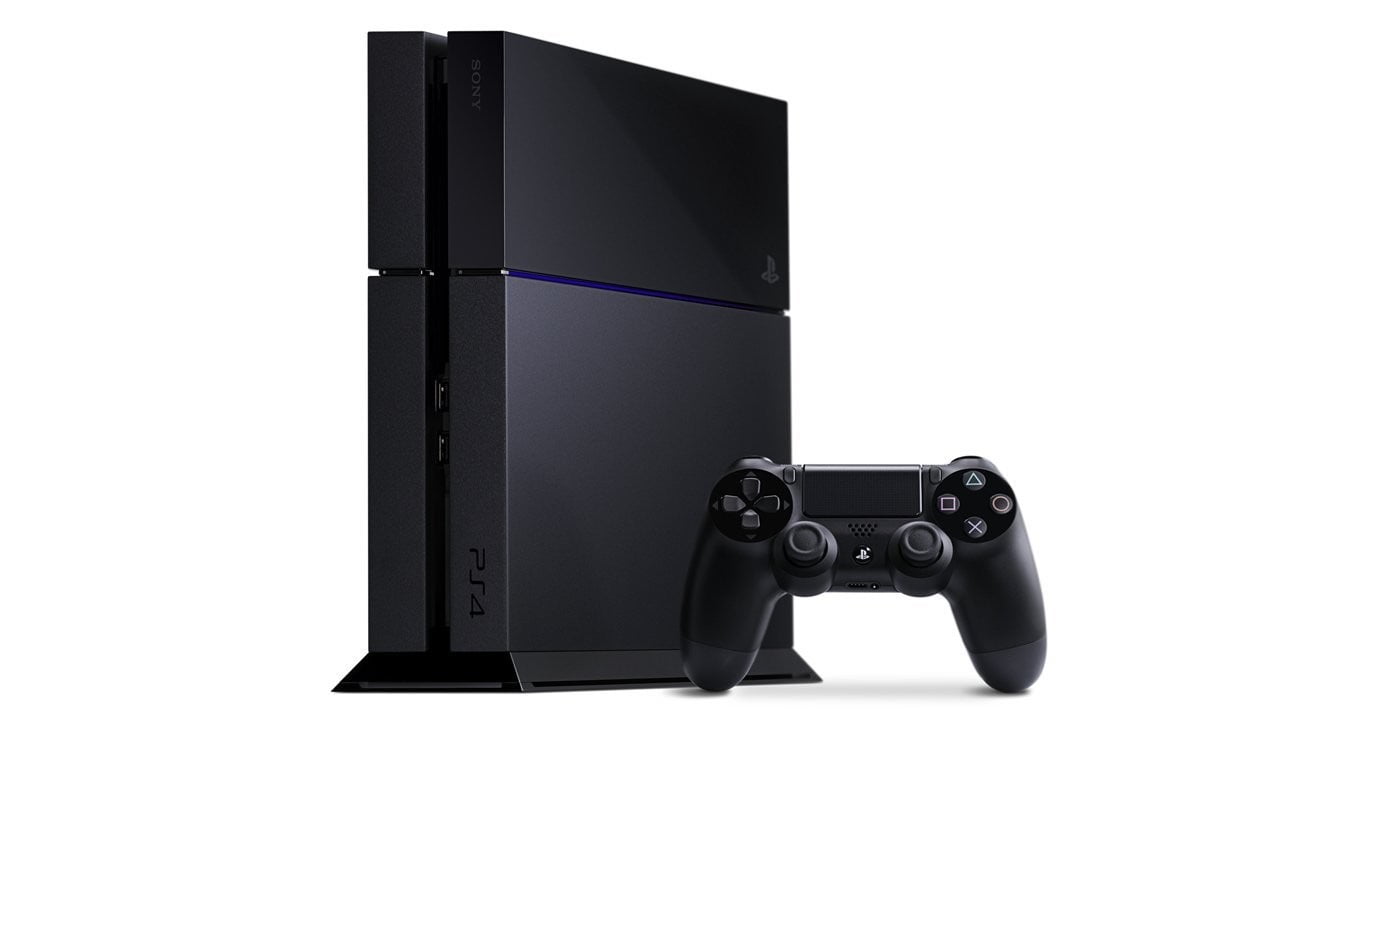 Sony PlayStation 4 500GB Jet Black Console (230267) Broken Manual Eject